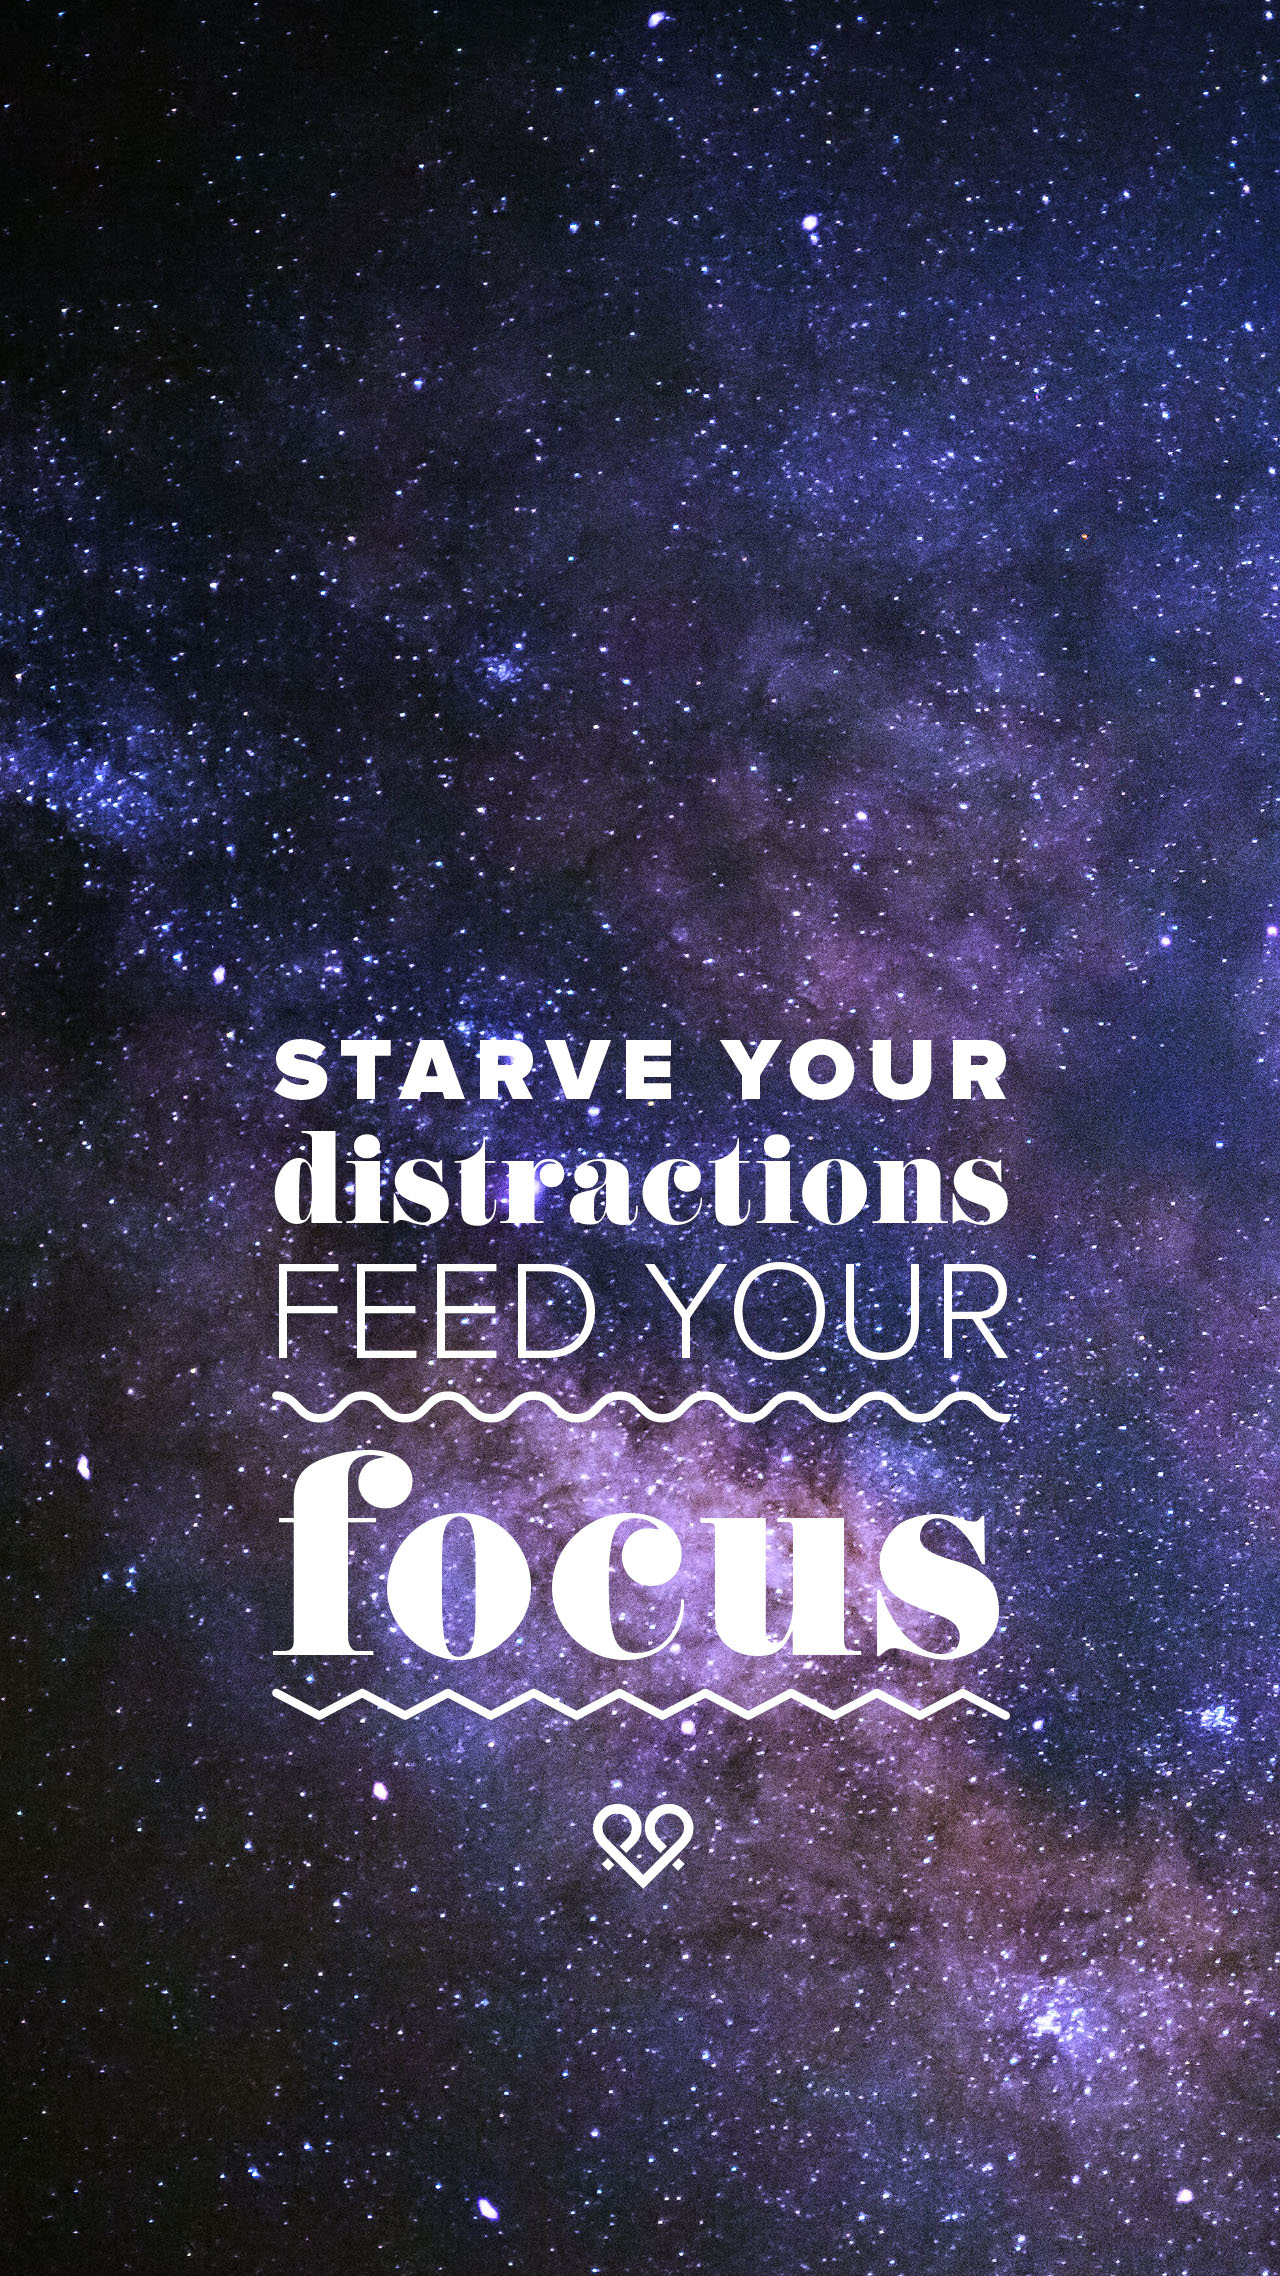 Keithabraham Feedyourfocus Universe - Starve Your Distractions Phone - HD Wallpaper 